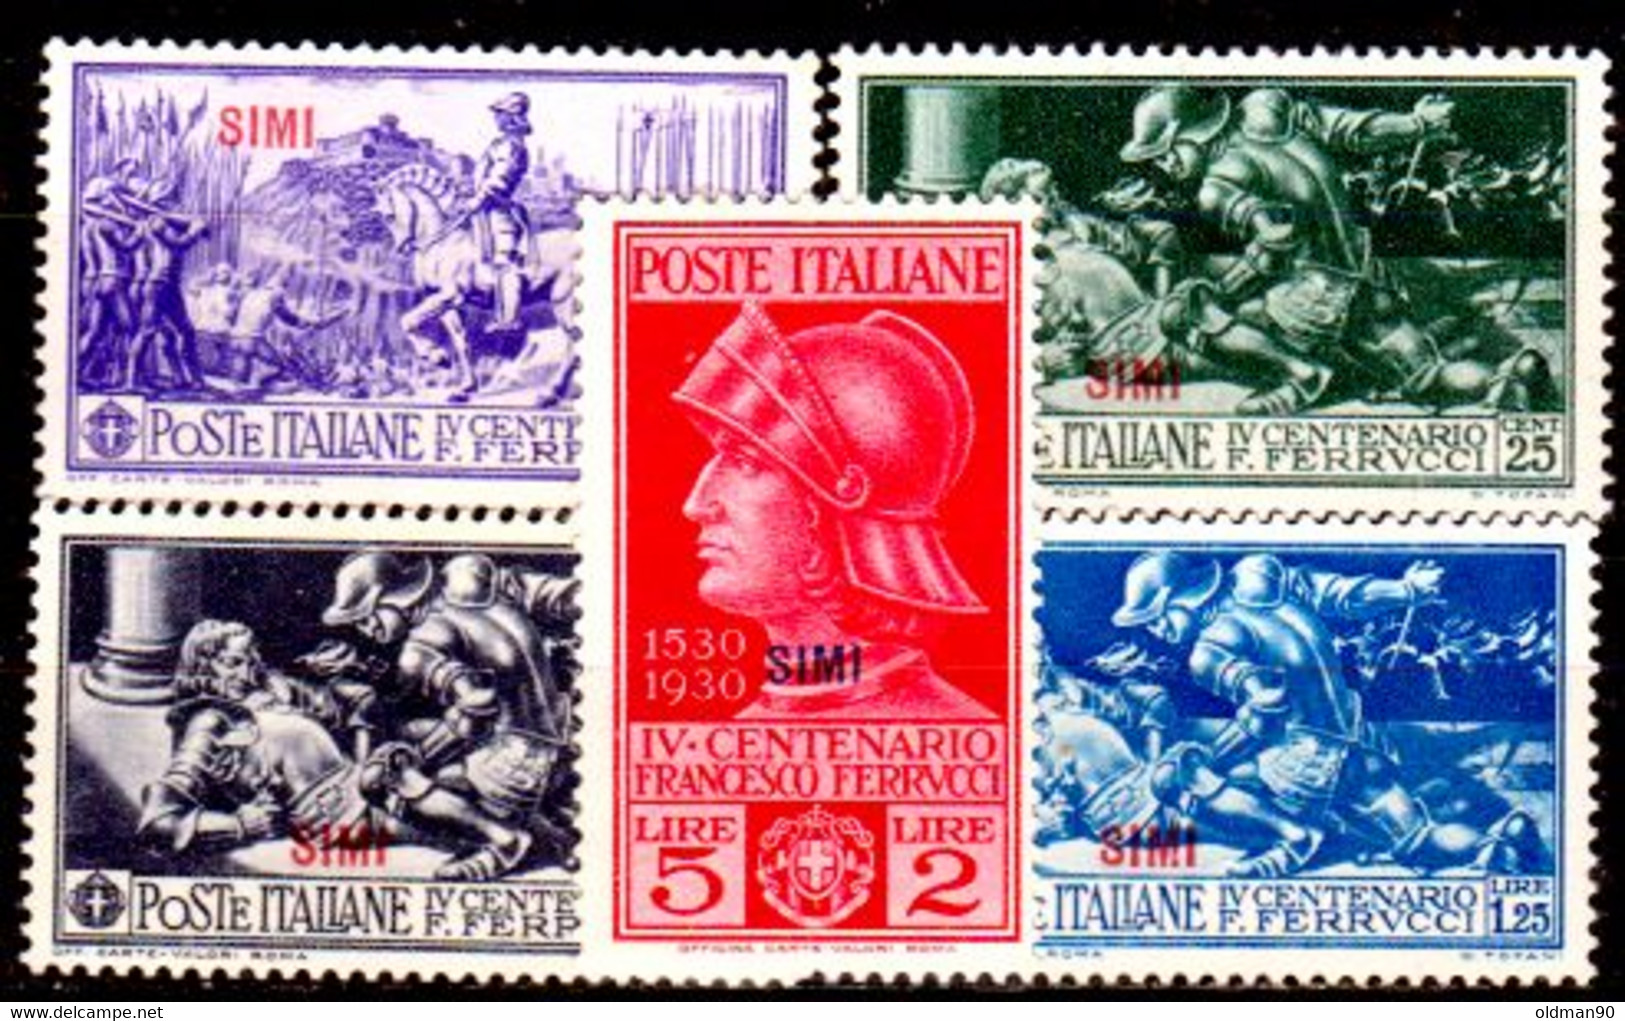 Egeo-OS-352- Simi: Original Stamps And Overprint 1930 (++) MNH - Quality In Your Opinion. - Egeo (Simi)